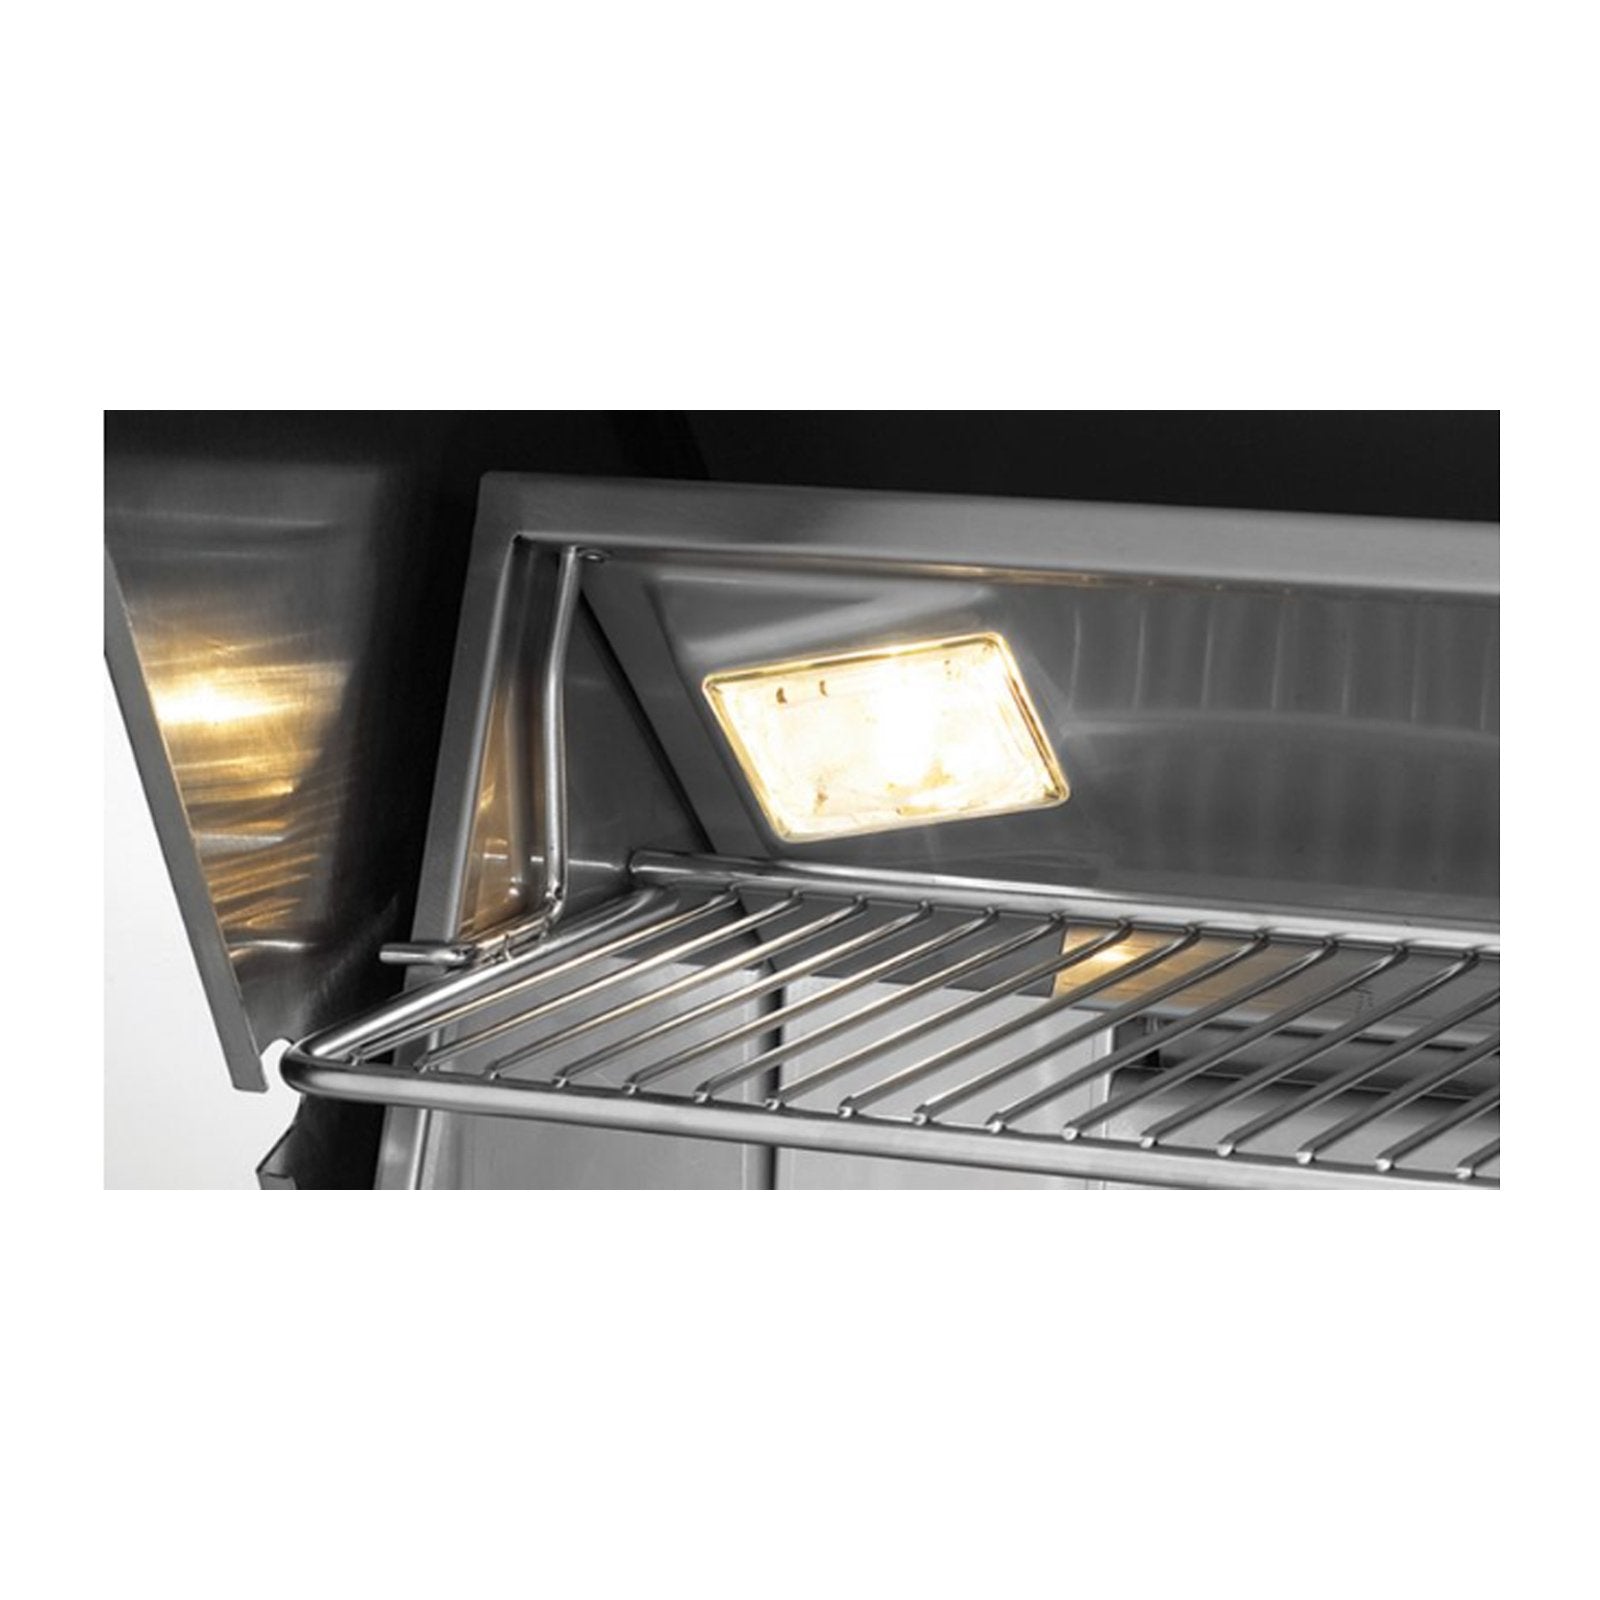 fire-magic-e790i-36-built-in-grill-w-rotis-window-analog-thermometer 4